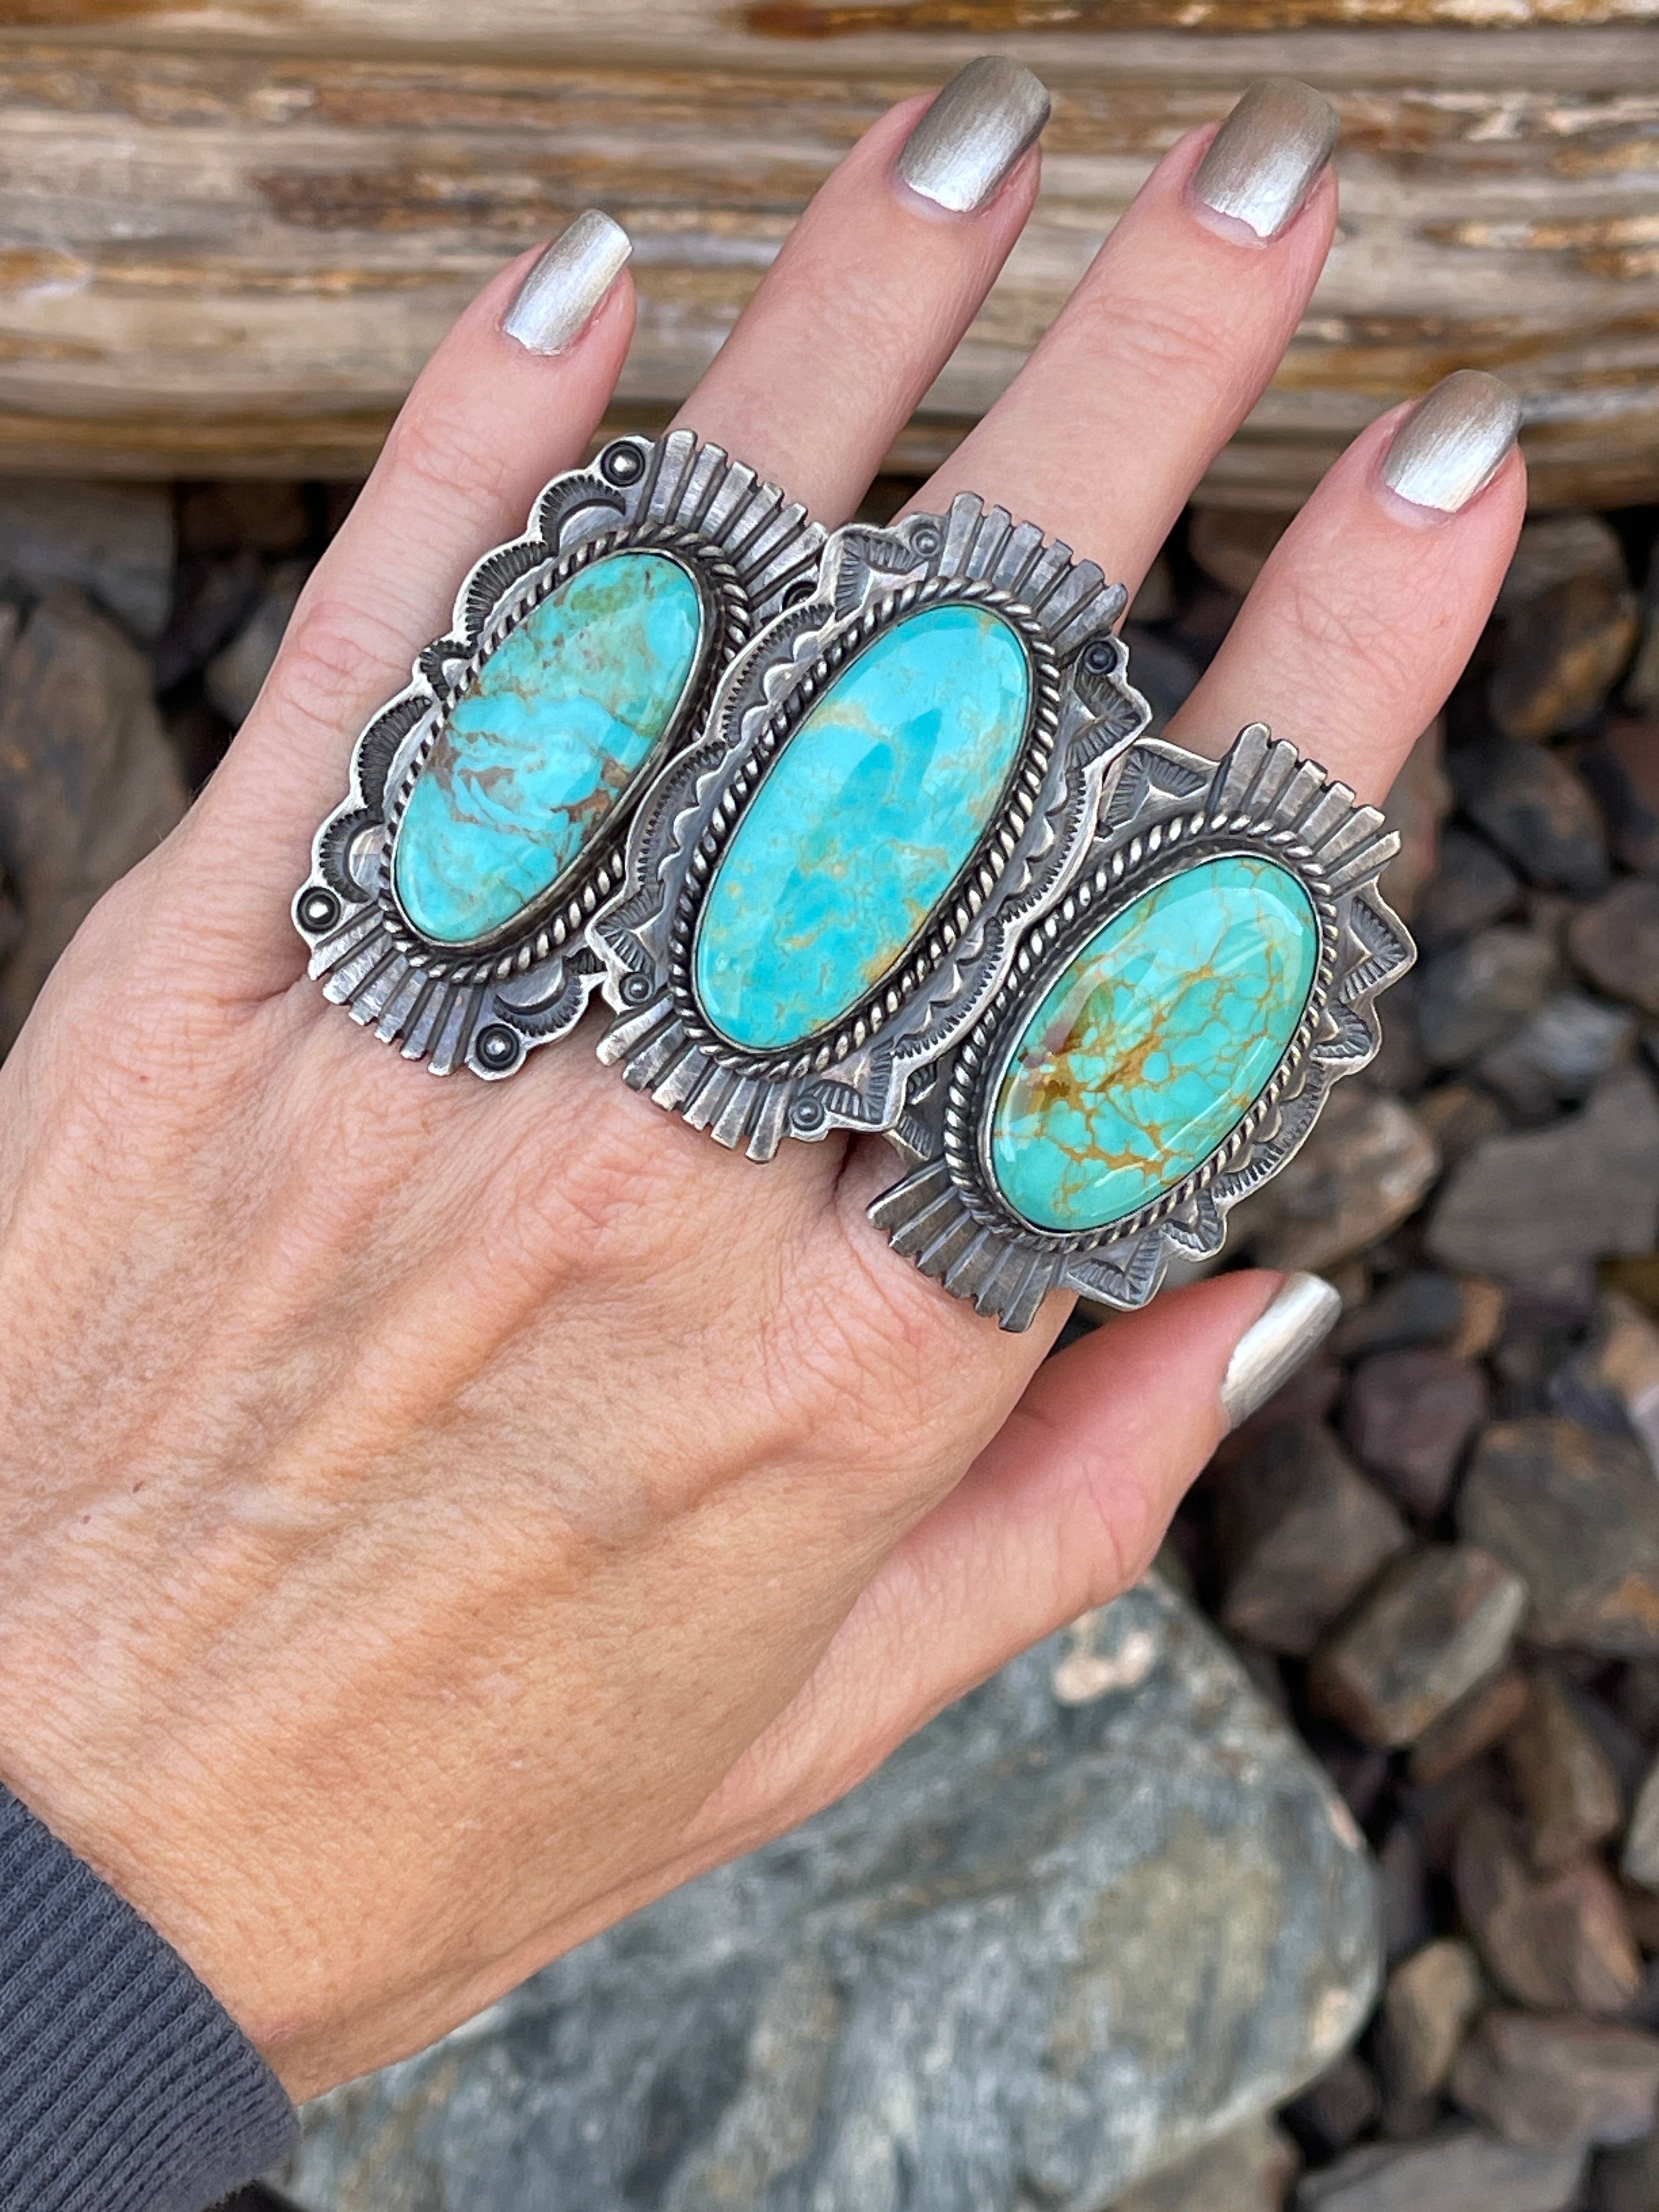 Copy of Large Handmade Solid Sterling Silver Kingman Turquoise Ring with Satin Finish - Size 7 1/2